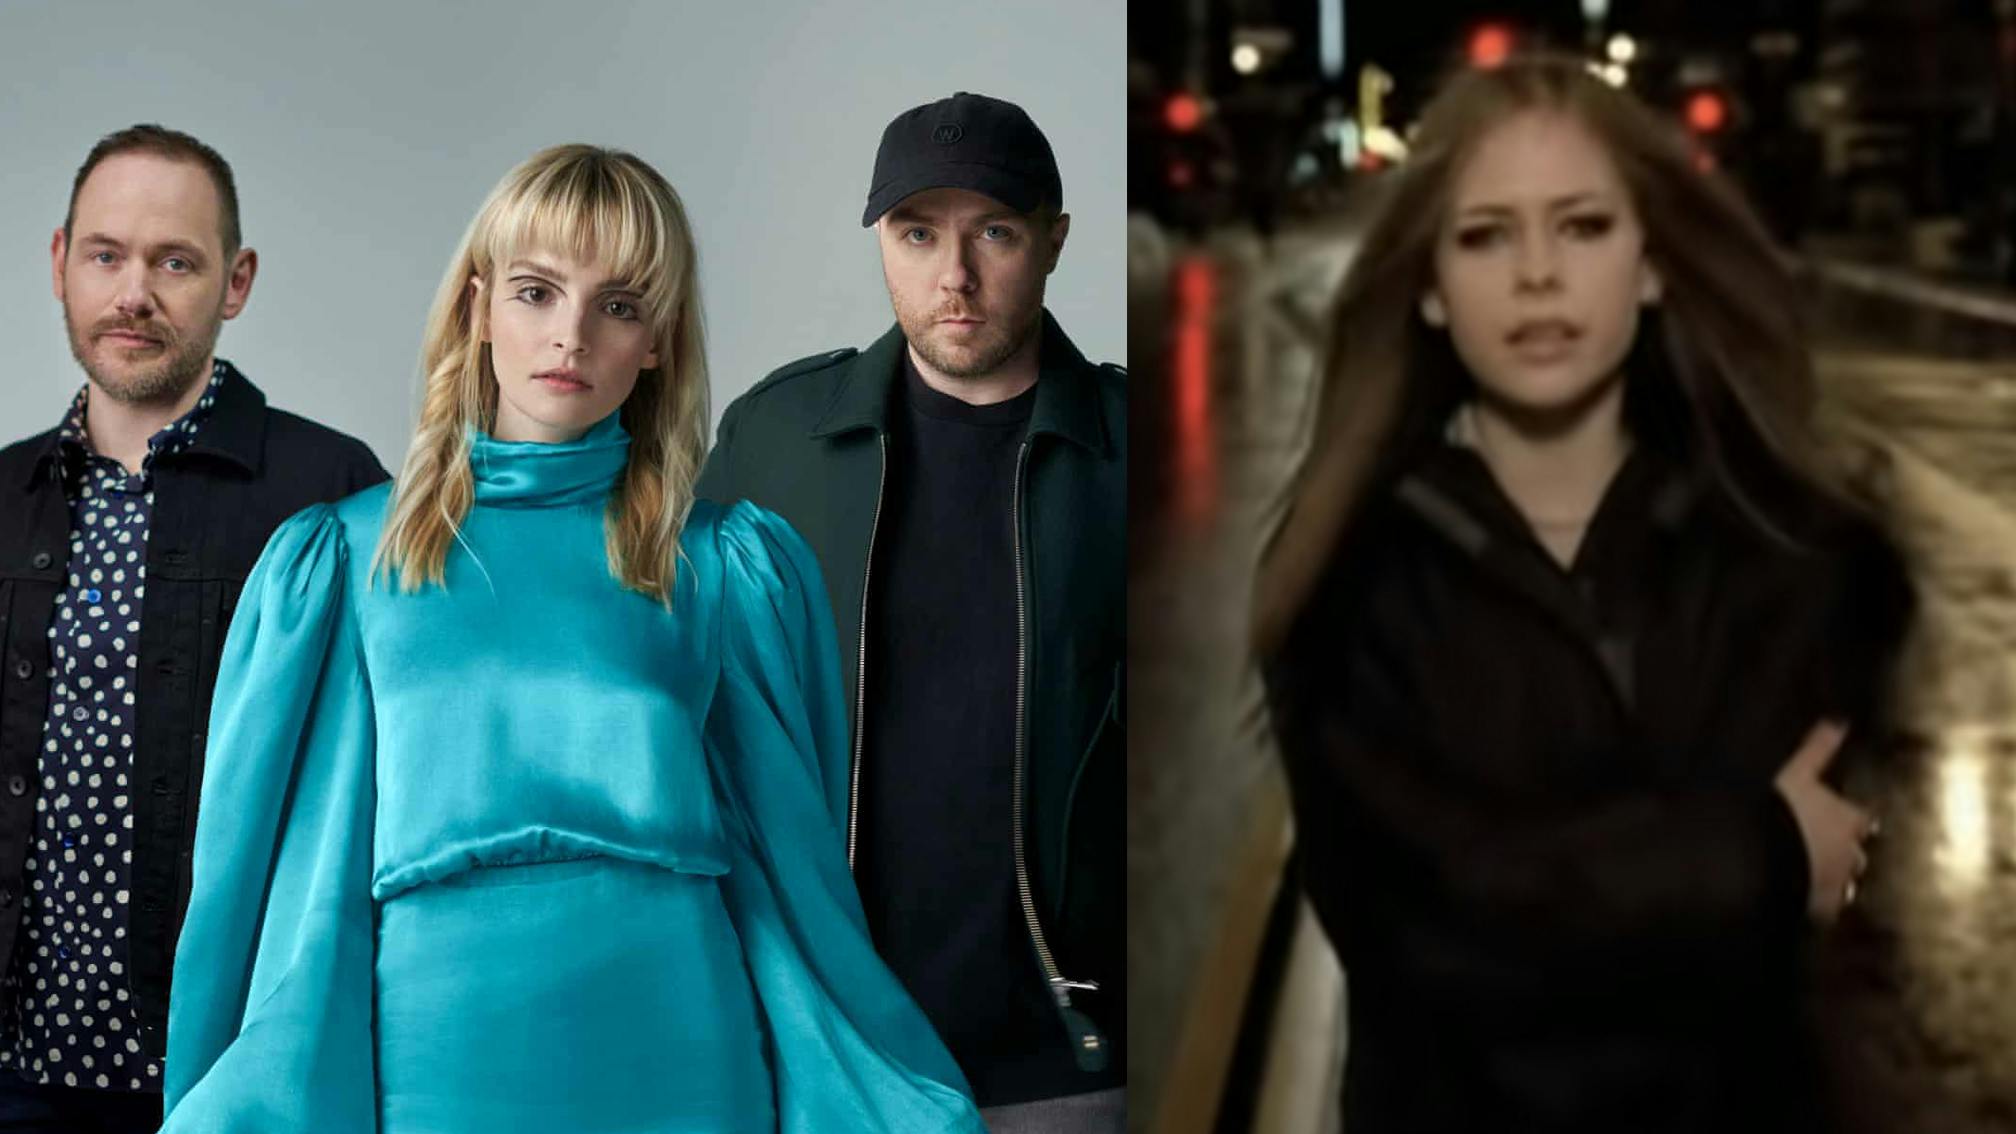 CHVRCHES cover Avril Lavigne's I'm With You: "A classic banger-ballad of our times"